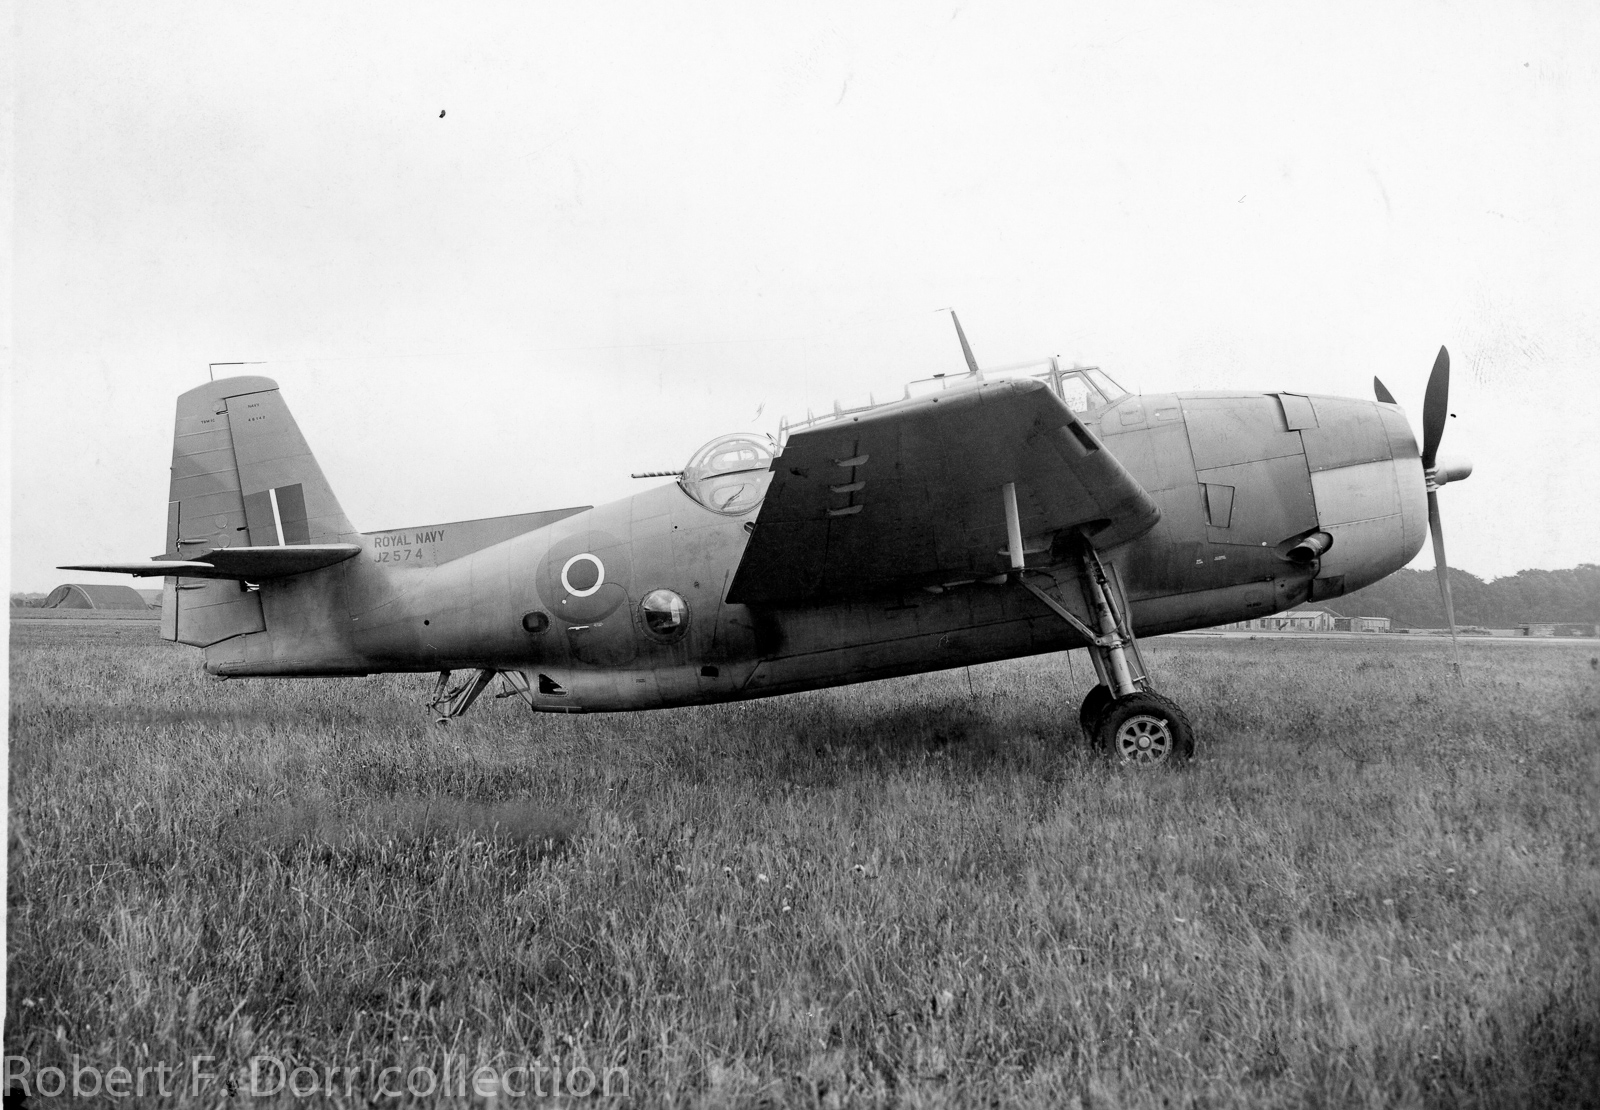 JZ574, an Avenger Mk.II of the Royal Navy's Fleet Air Arm at Boscombe Down, a test establishment in Wiltshire, England. JZ574 served in the Pacific Theatre with 820 Squadron aboard HMS Indefatigable between December 1944 and April, 1945. (photo via Robert F. Dorr collection)